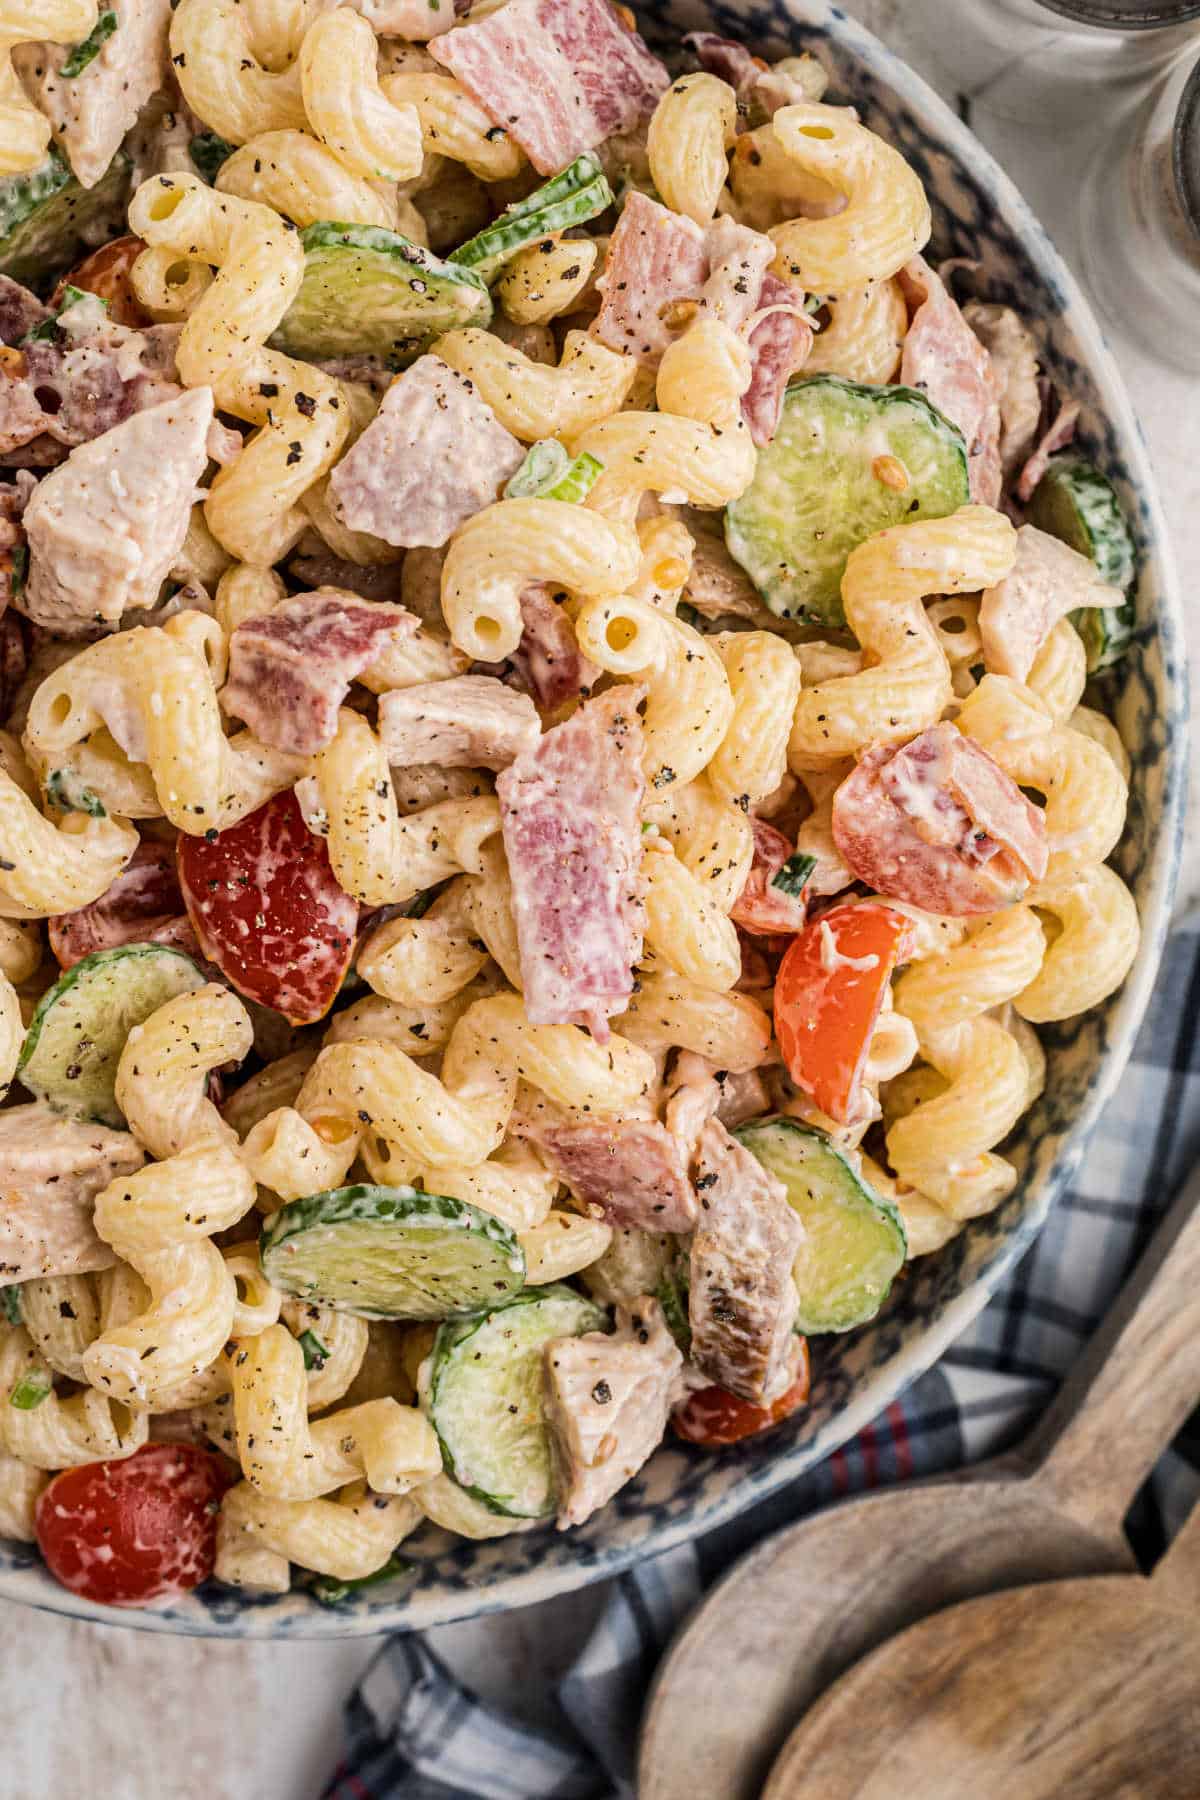 Overhead close up shot of a bowl of pasta salad, with curly noodles and chicken and bacon.